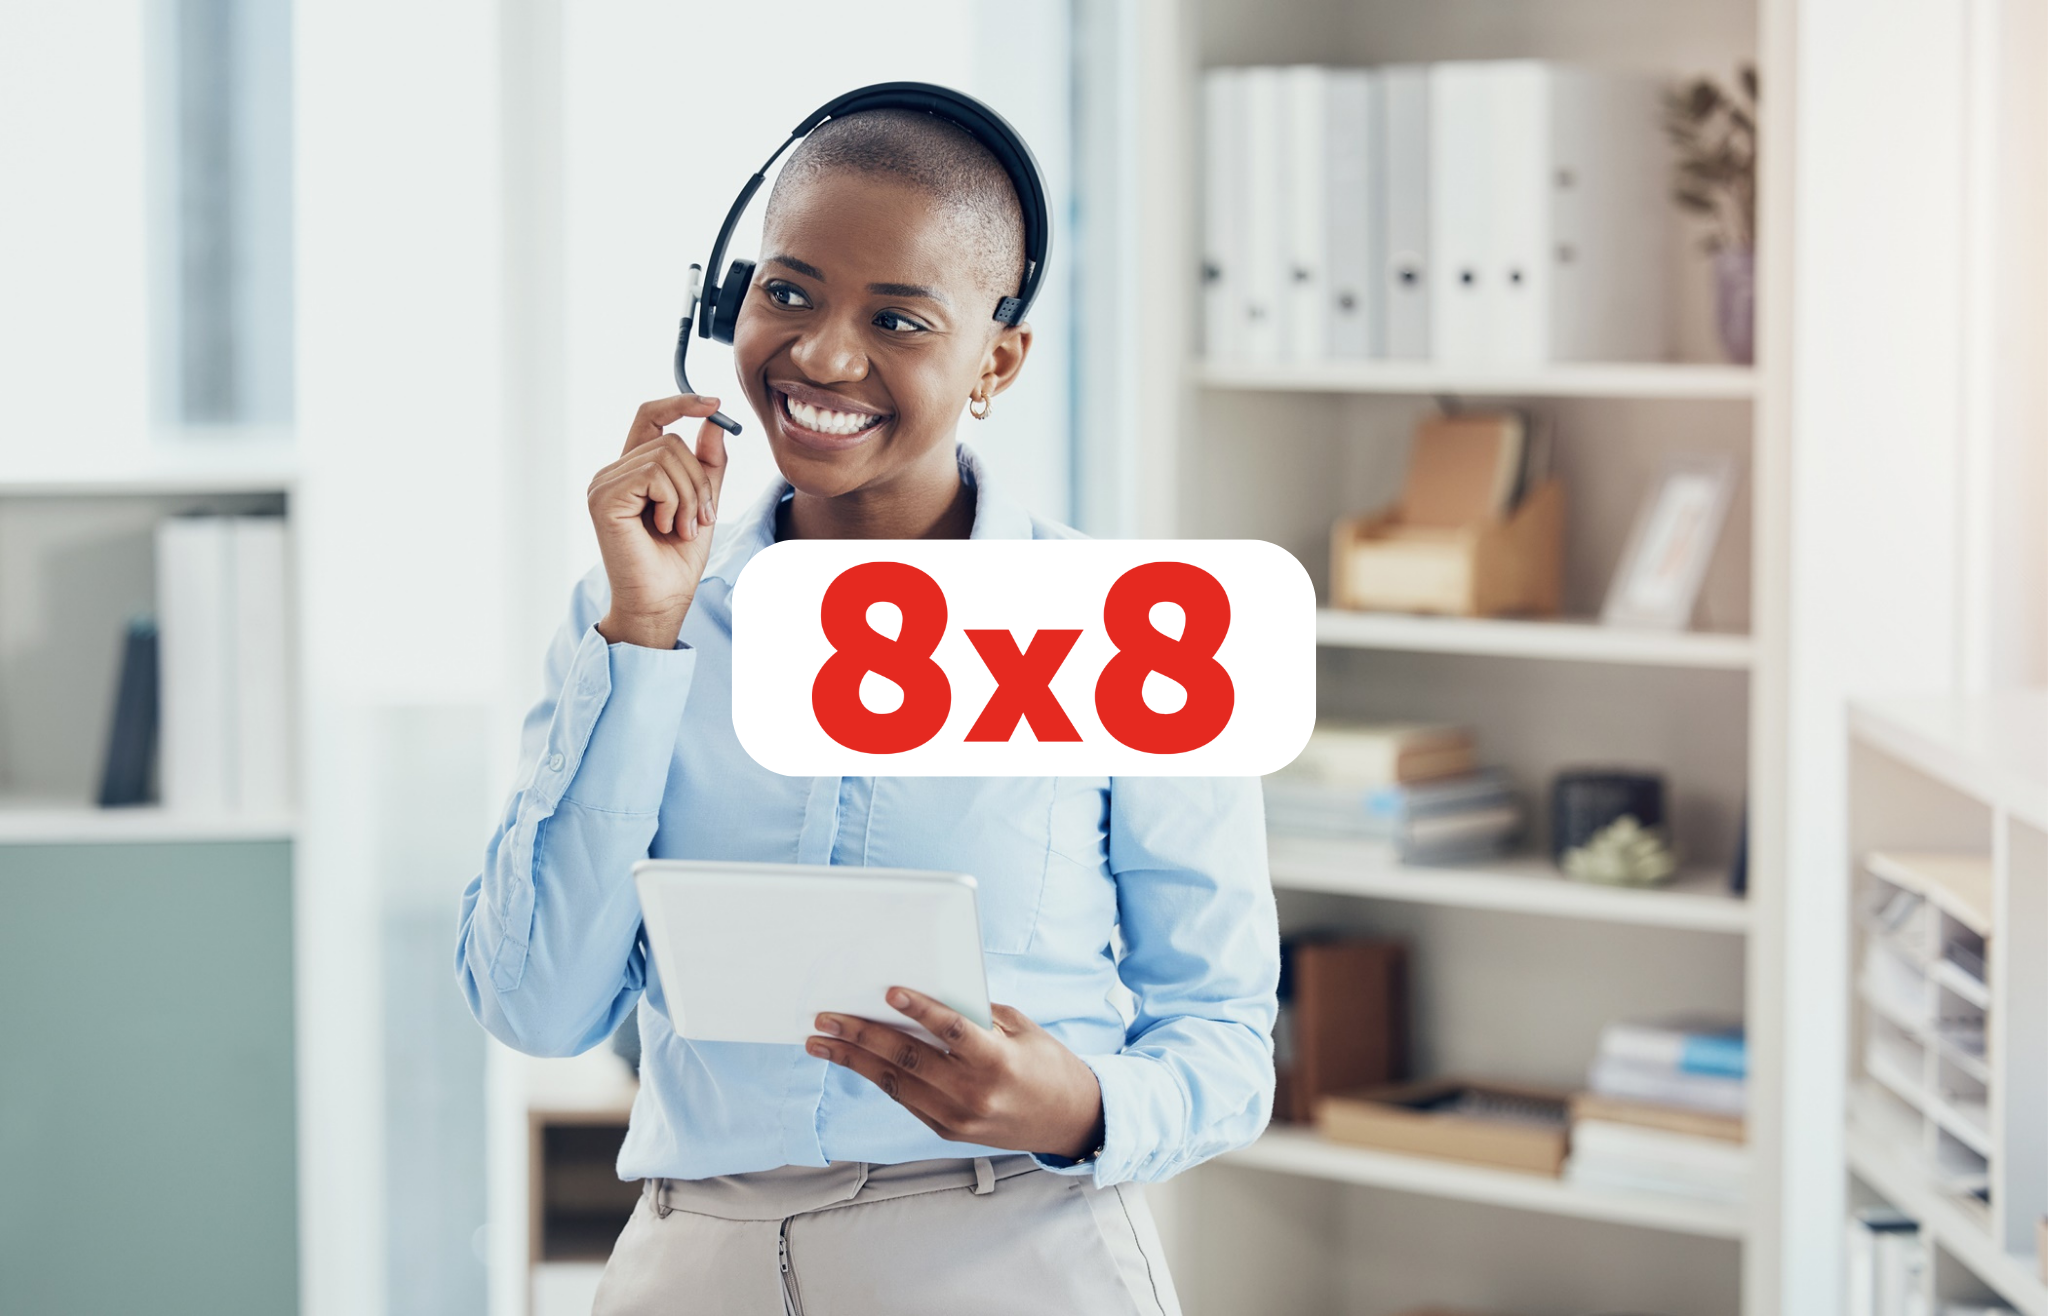 8x8 Launches Omni Shield, a Game-Changer in SMS Fraud Prevention - CX Scoop